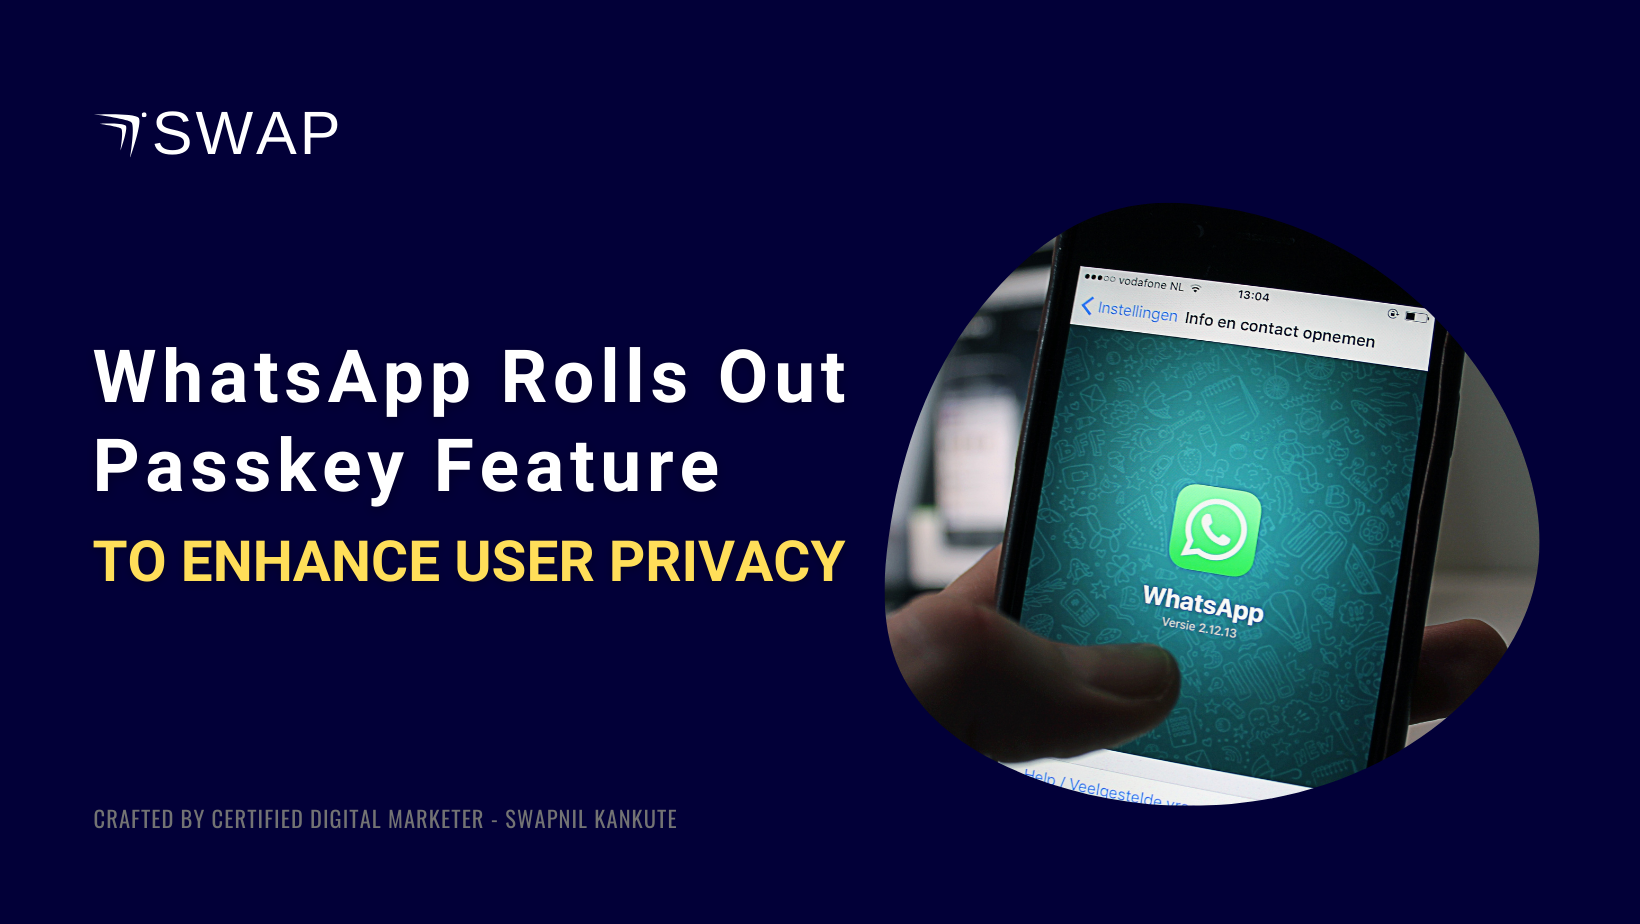 WhatsApp Rolls Out Passkey Feature to Enhance User Privacy - Swapnil Kankute blog 